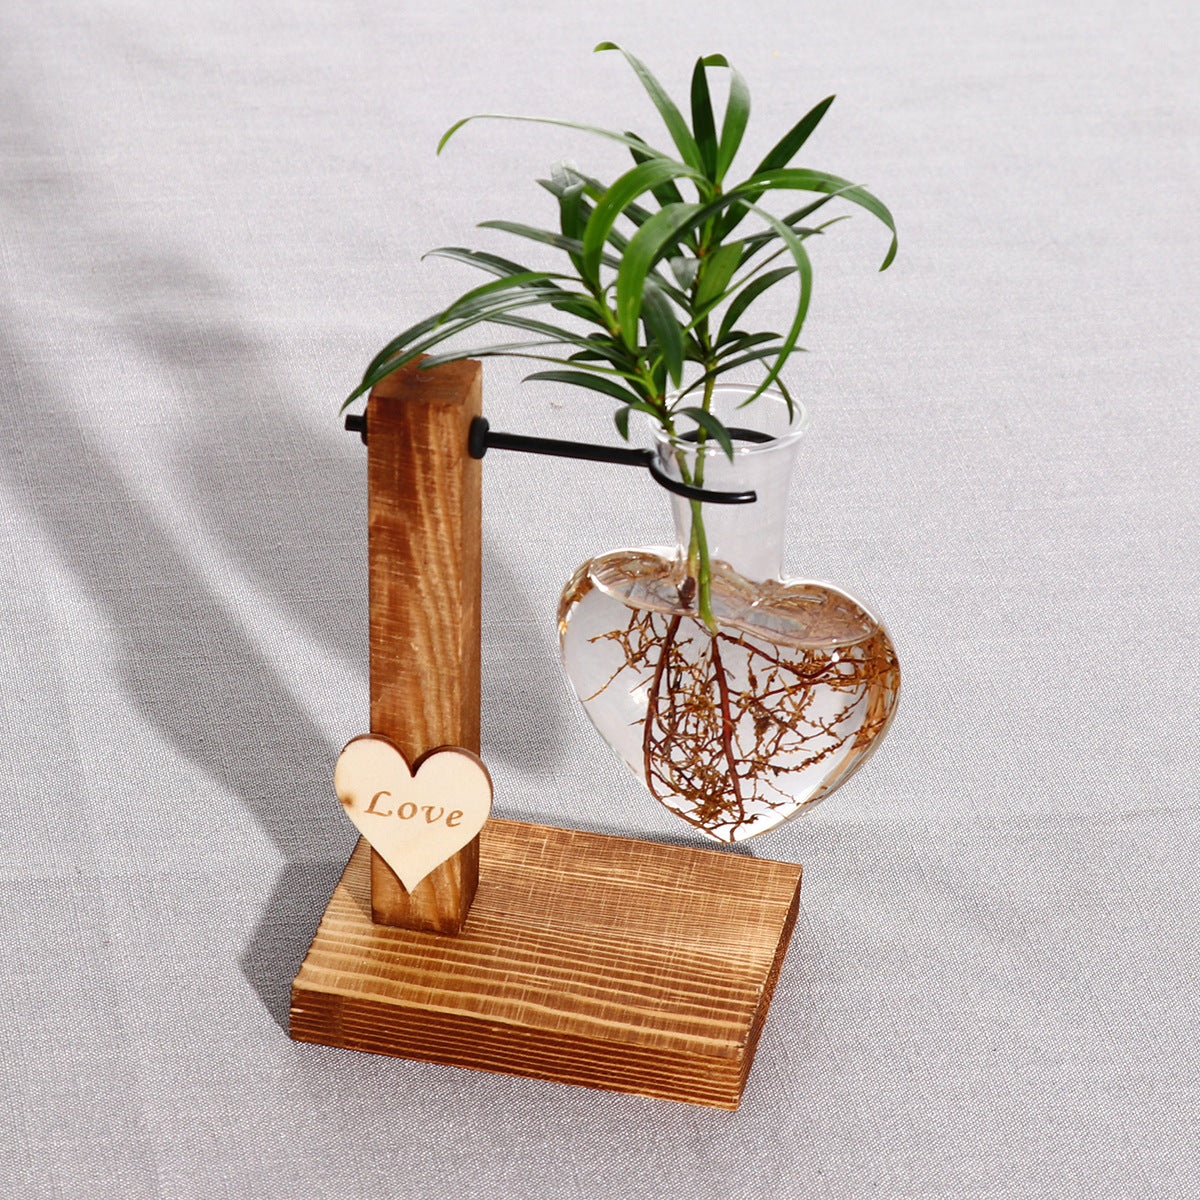 Love Heart Shape Clear Glass Hydroponic Flower Vase with Wooden Stand